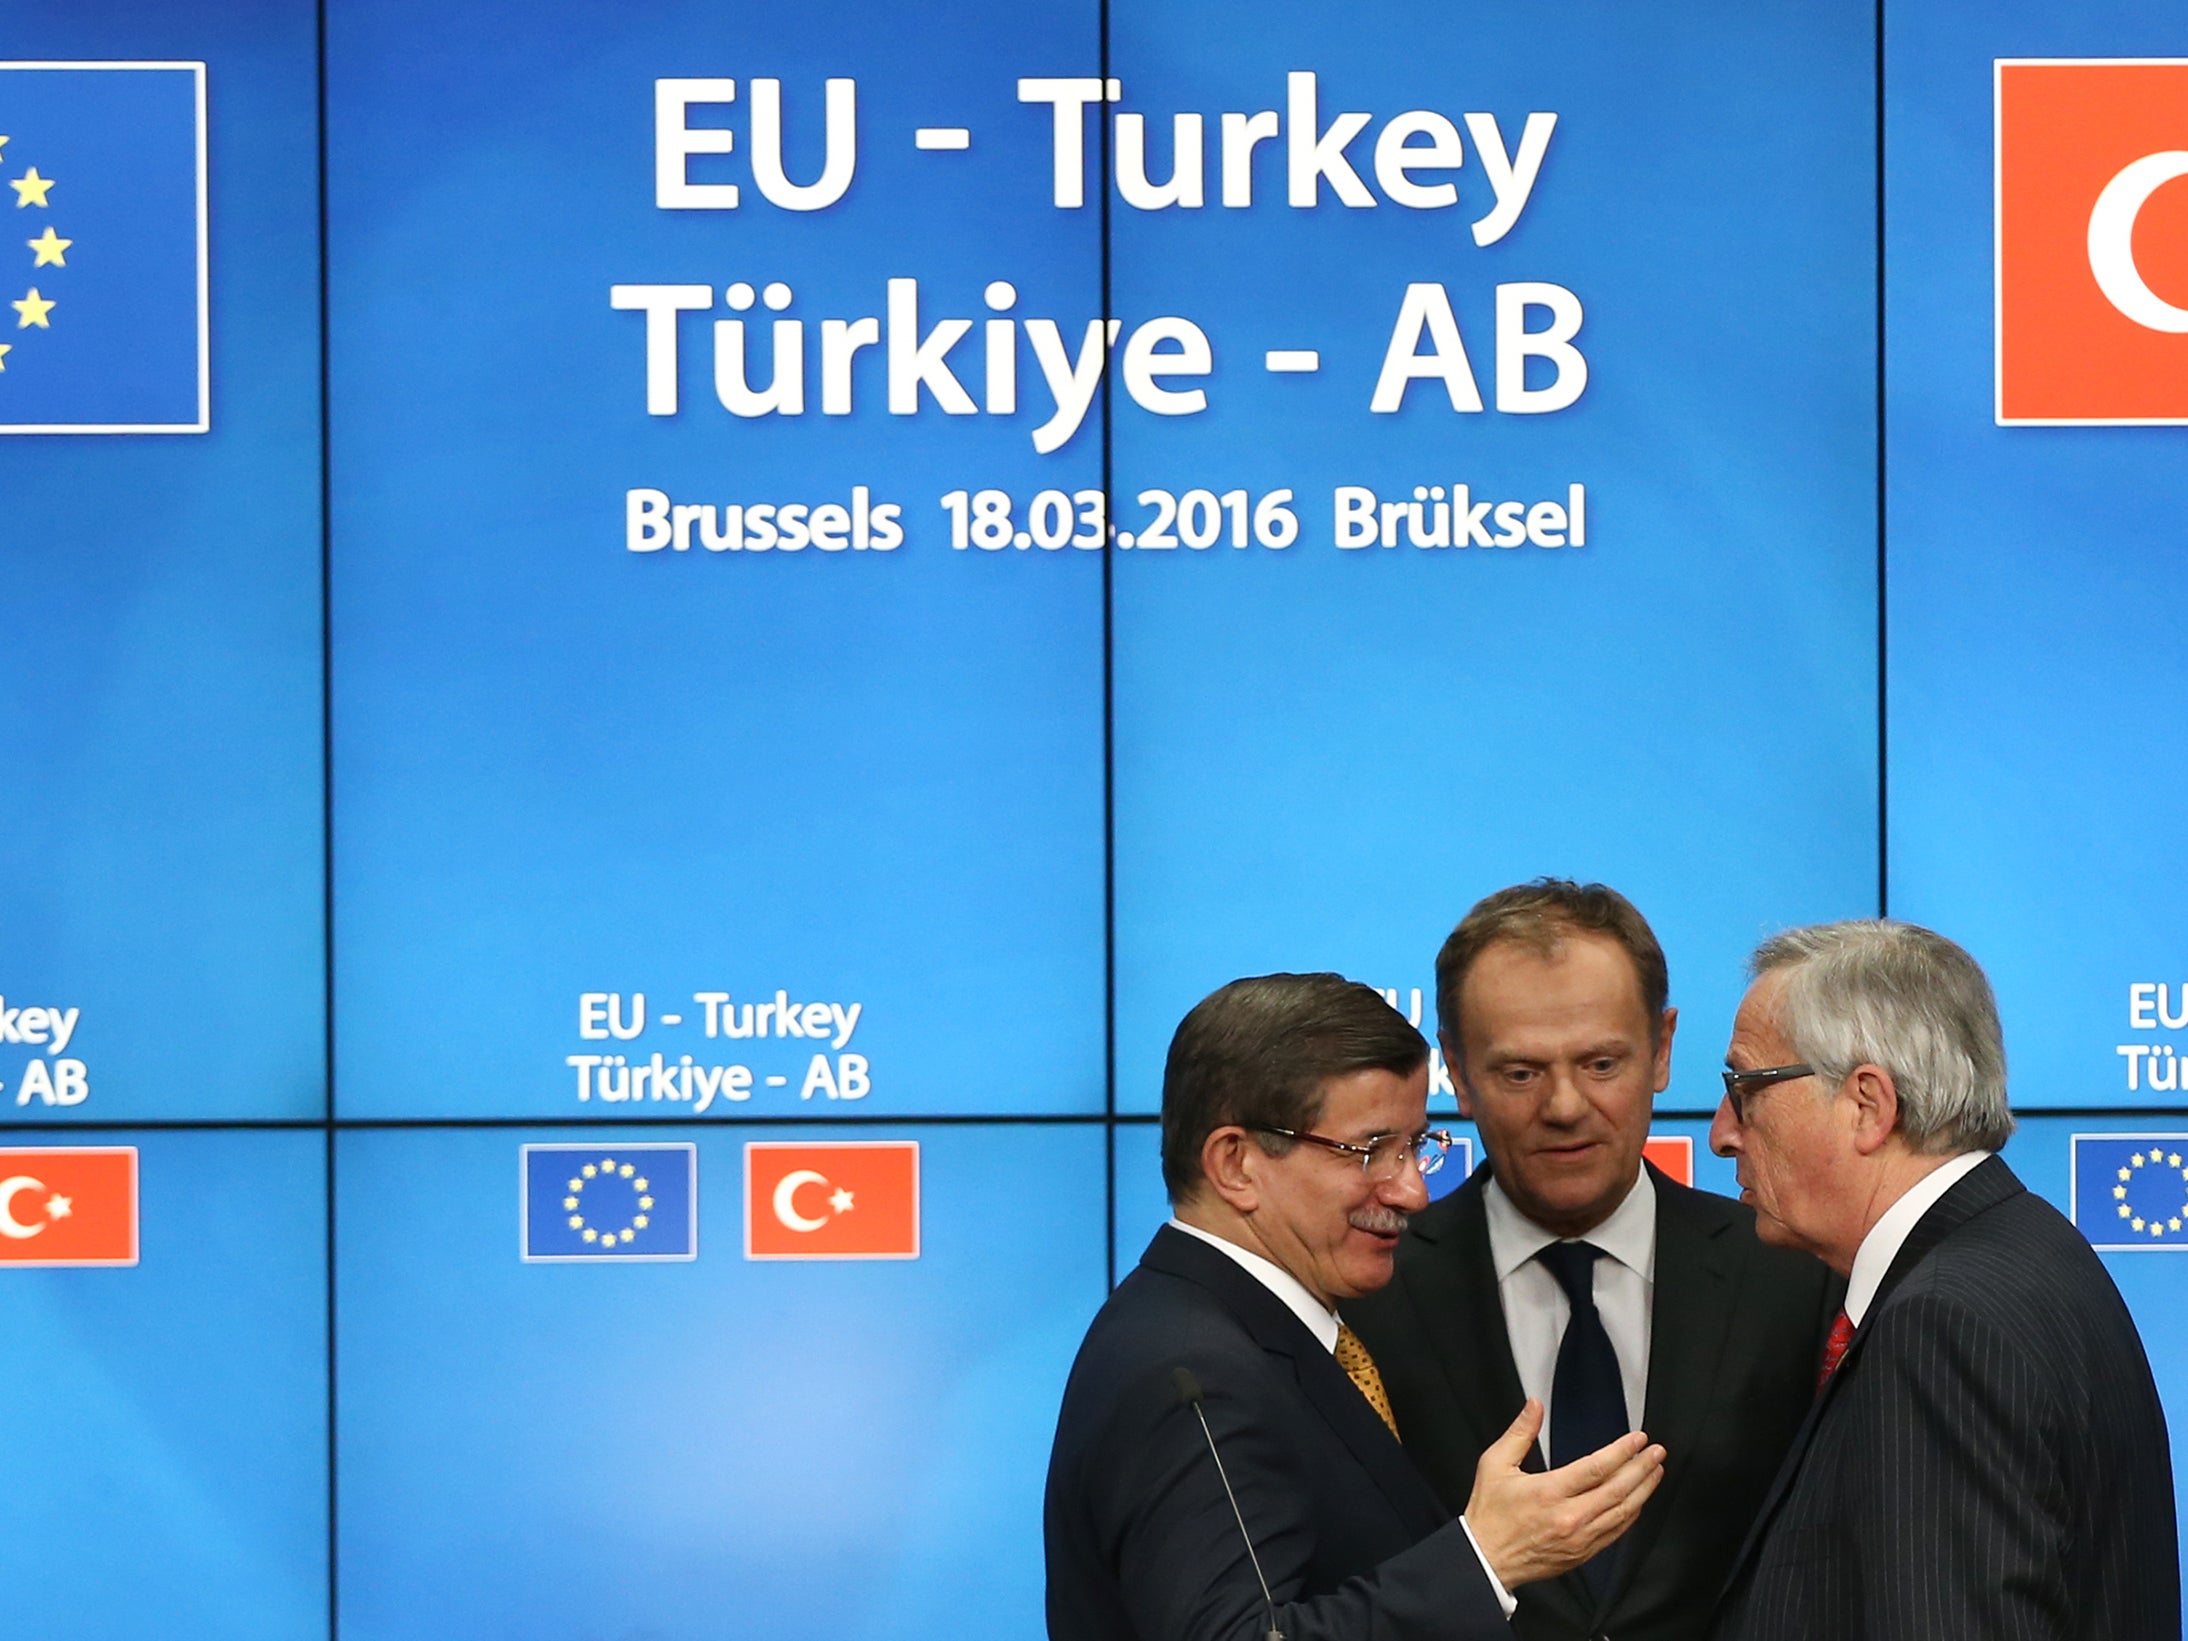 Turkey's Prime Minister, Ahmet Davutoglu (L) shakes hands with President of the European Council, Donald Tusk (C) and President of the European Commission, Jean-Claude Juncker, after a press conference to discuss the migrant deal reached between Turkey and EU states (Getty Images )